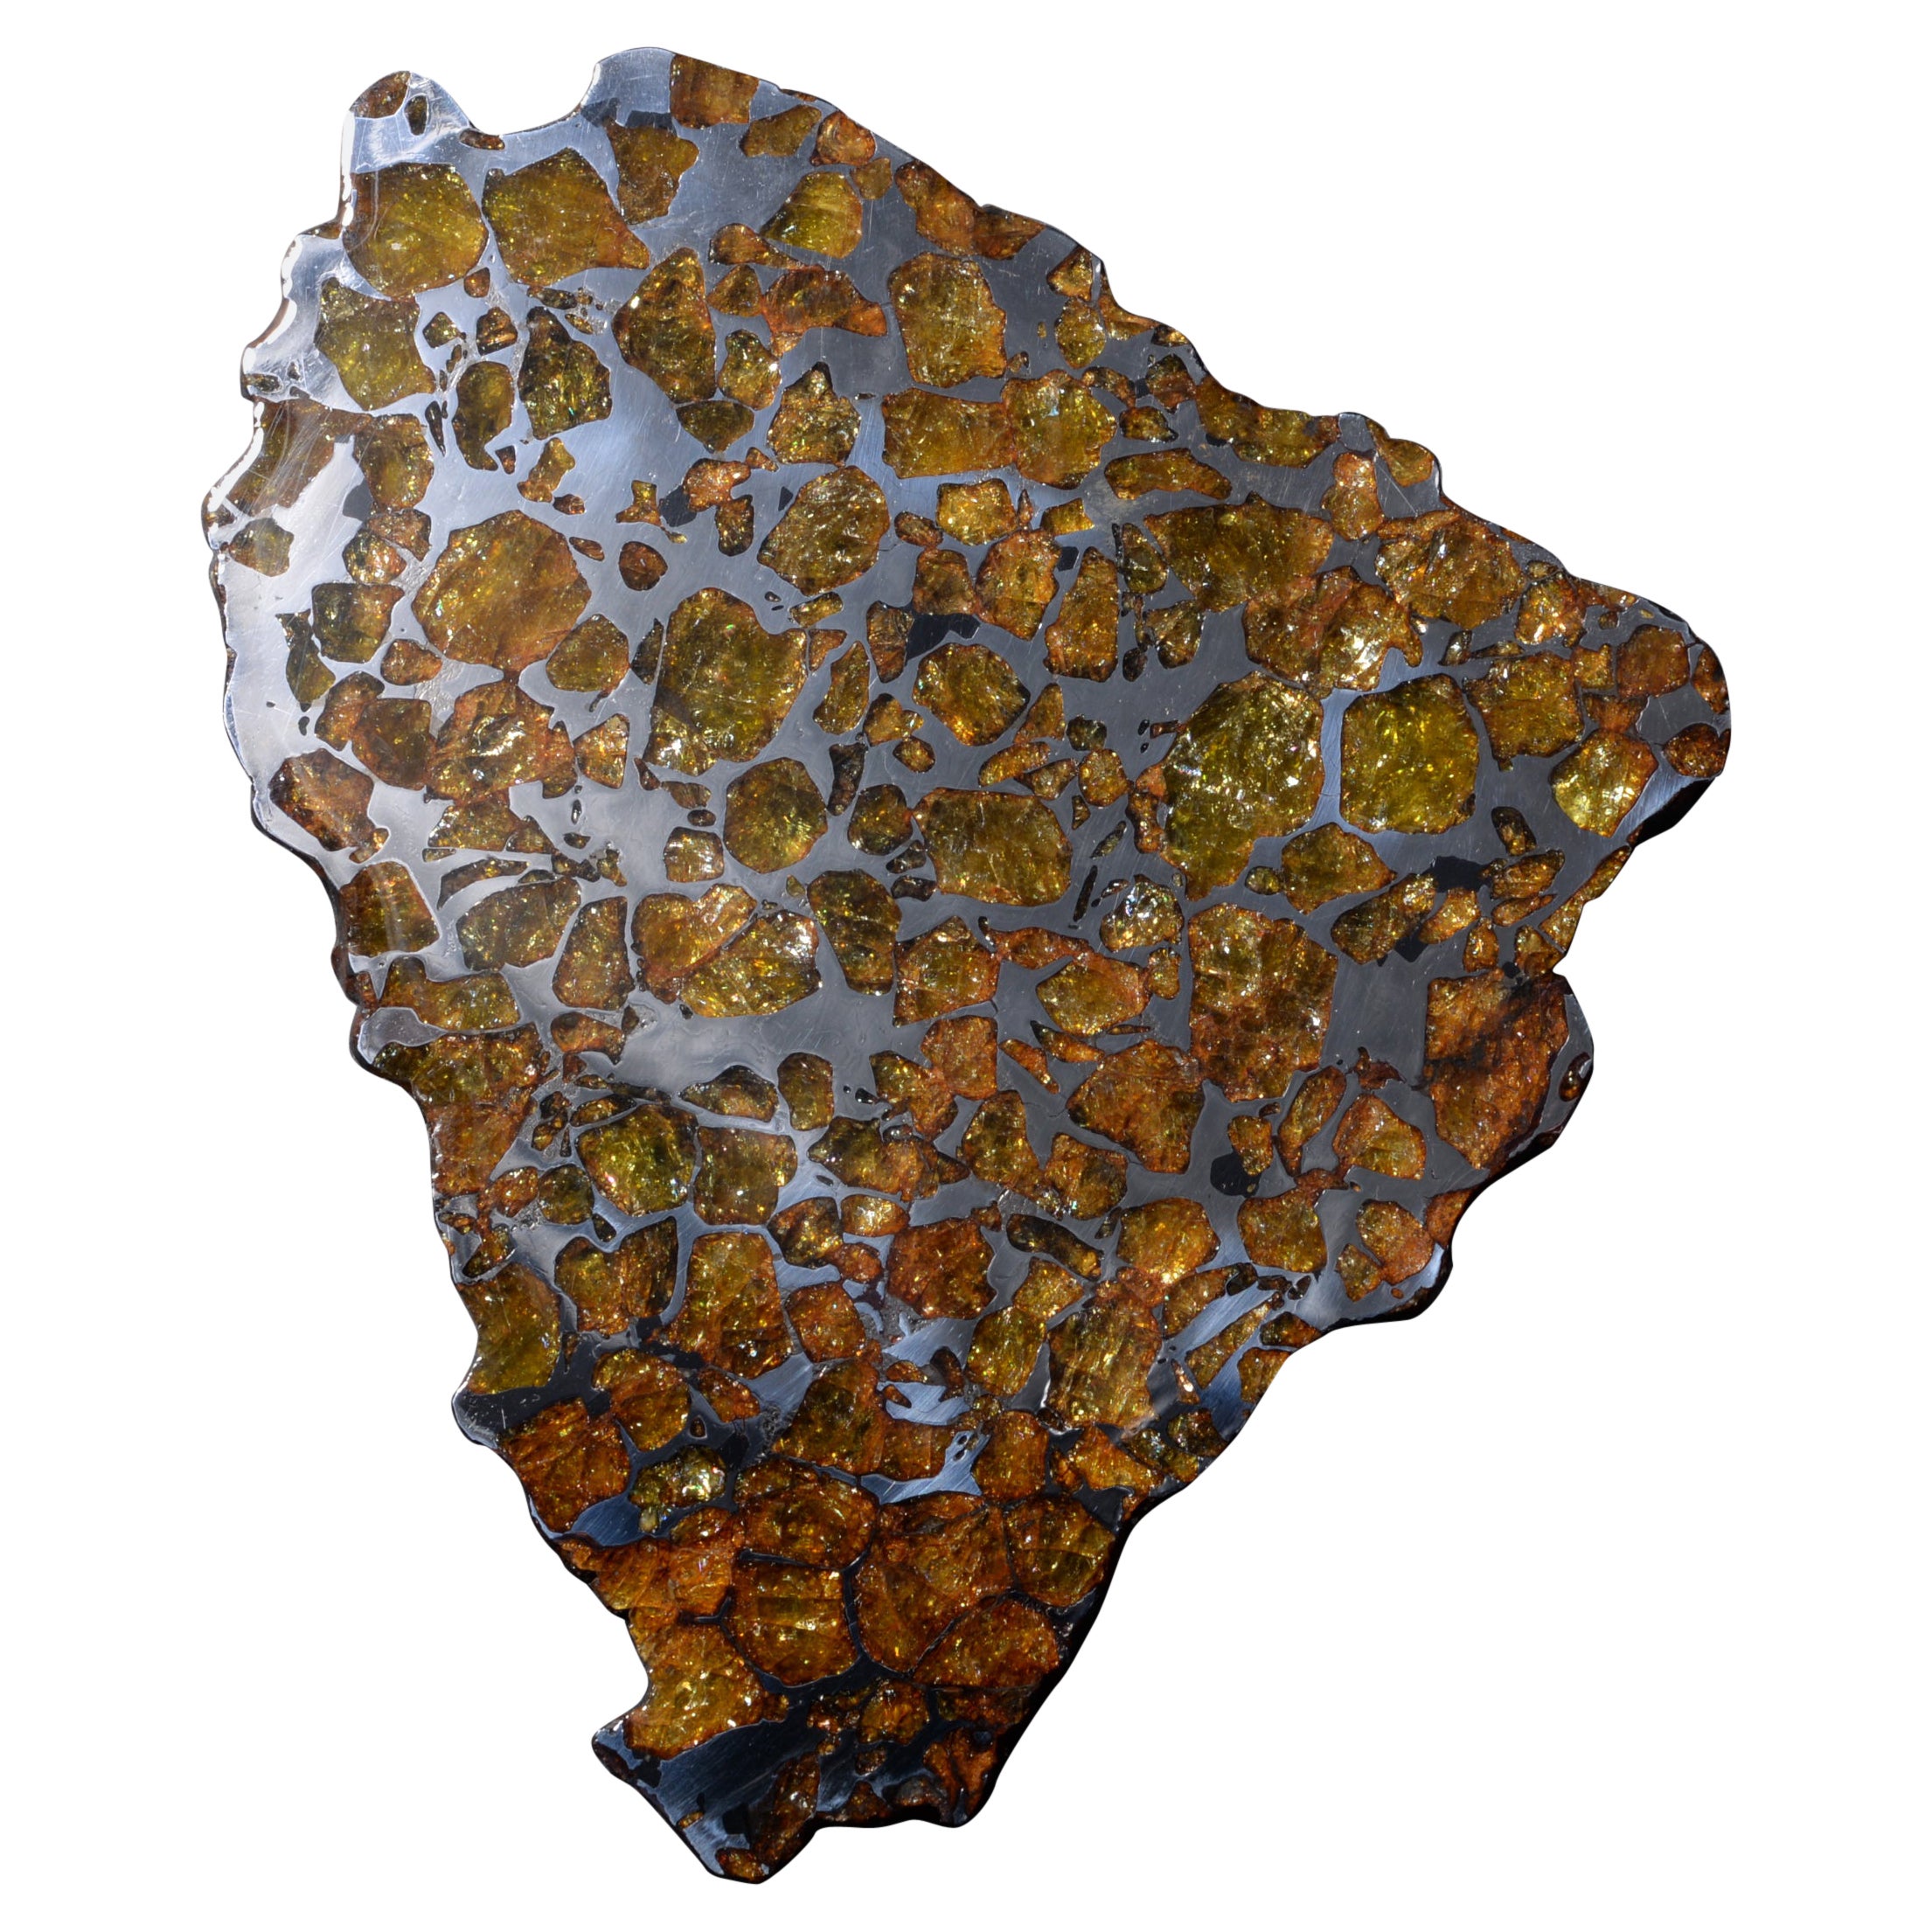 End-Cut from the Imilac Meteorite For Sale